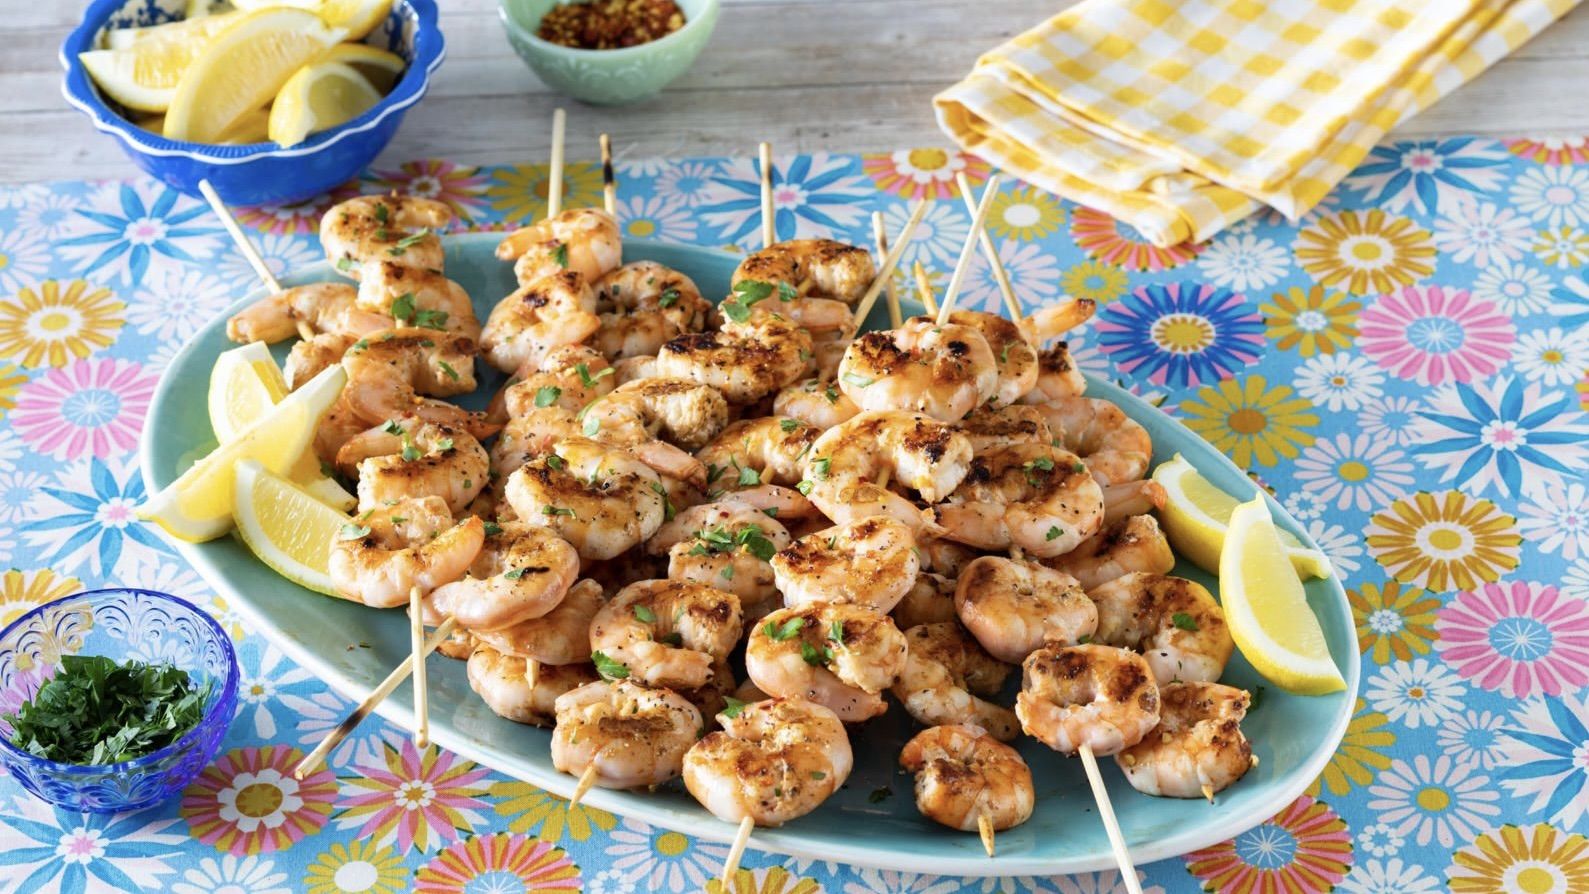 Juicy Grilled Shrimp (How to Grill Shrimp) - Fit Foodie Finds